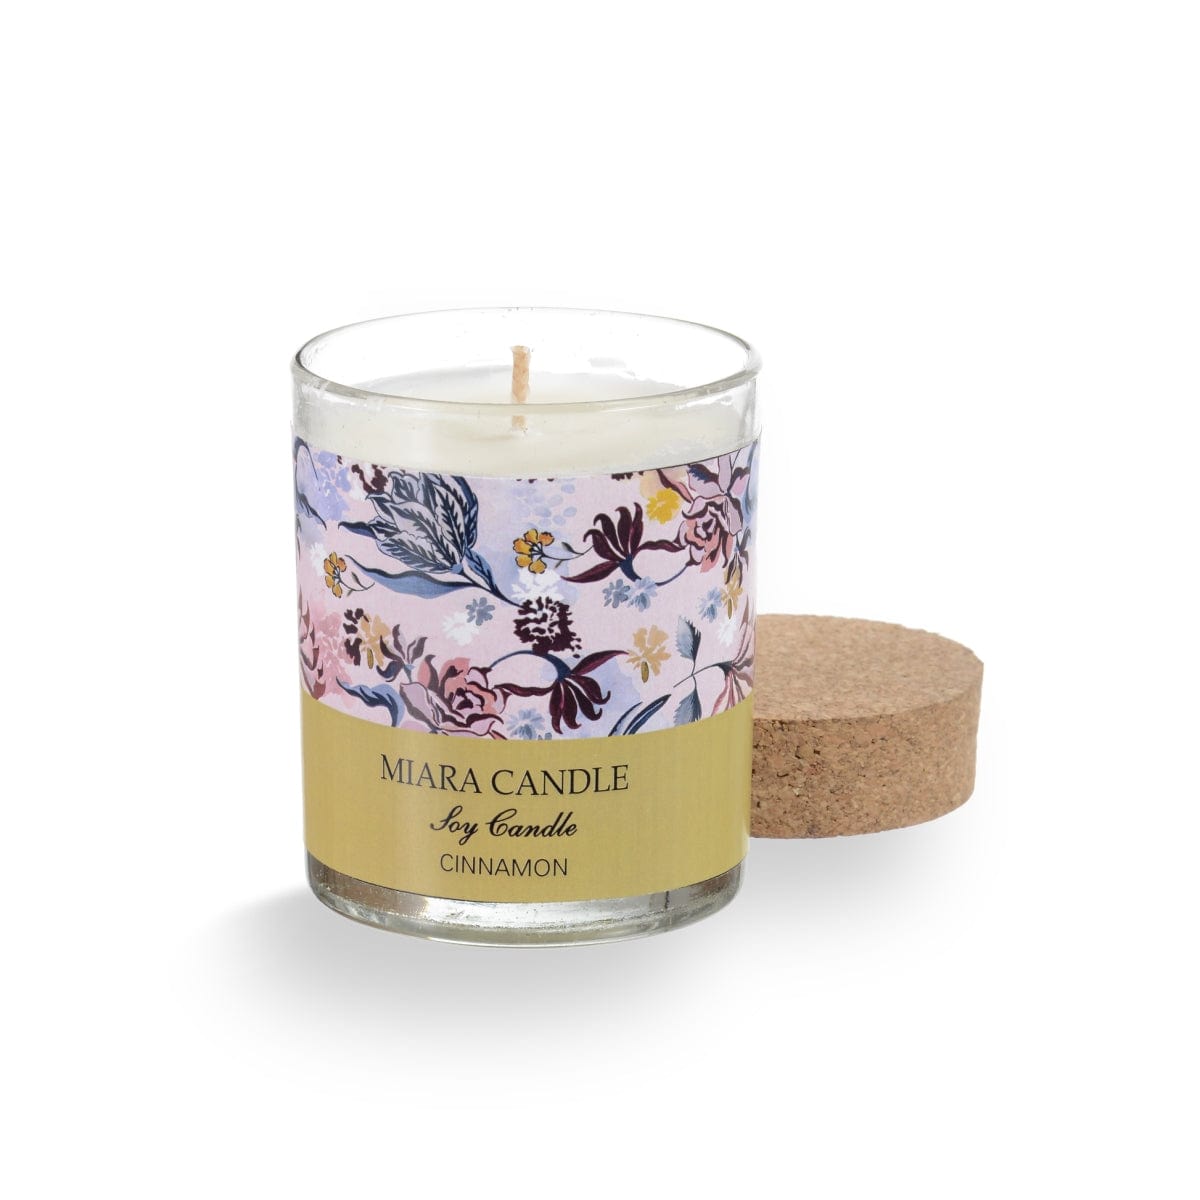 Gifts of Love Miara Candle Gift Set S4